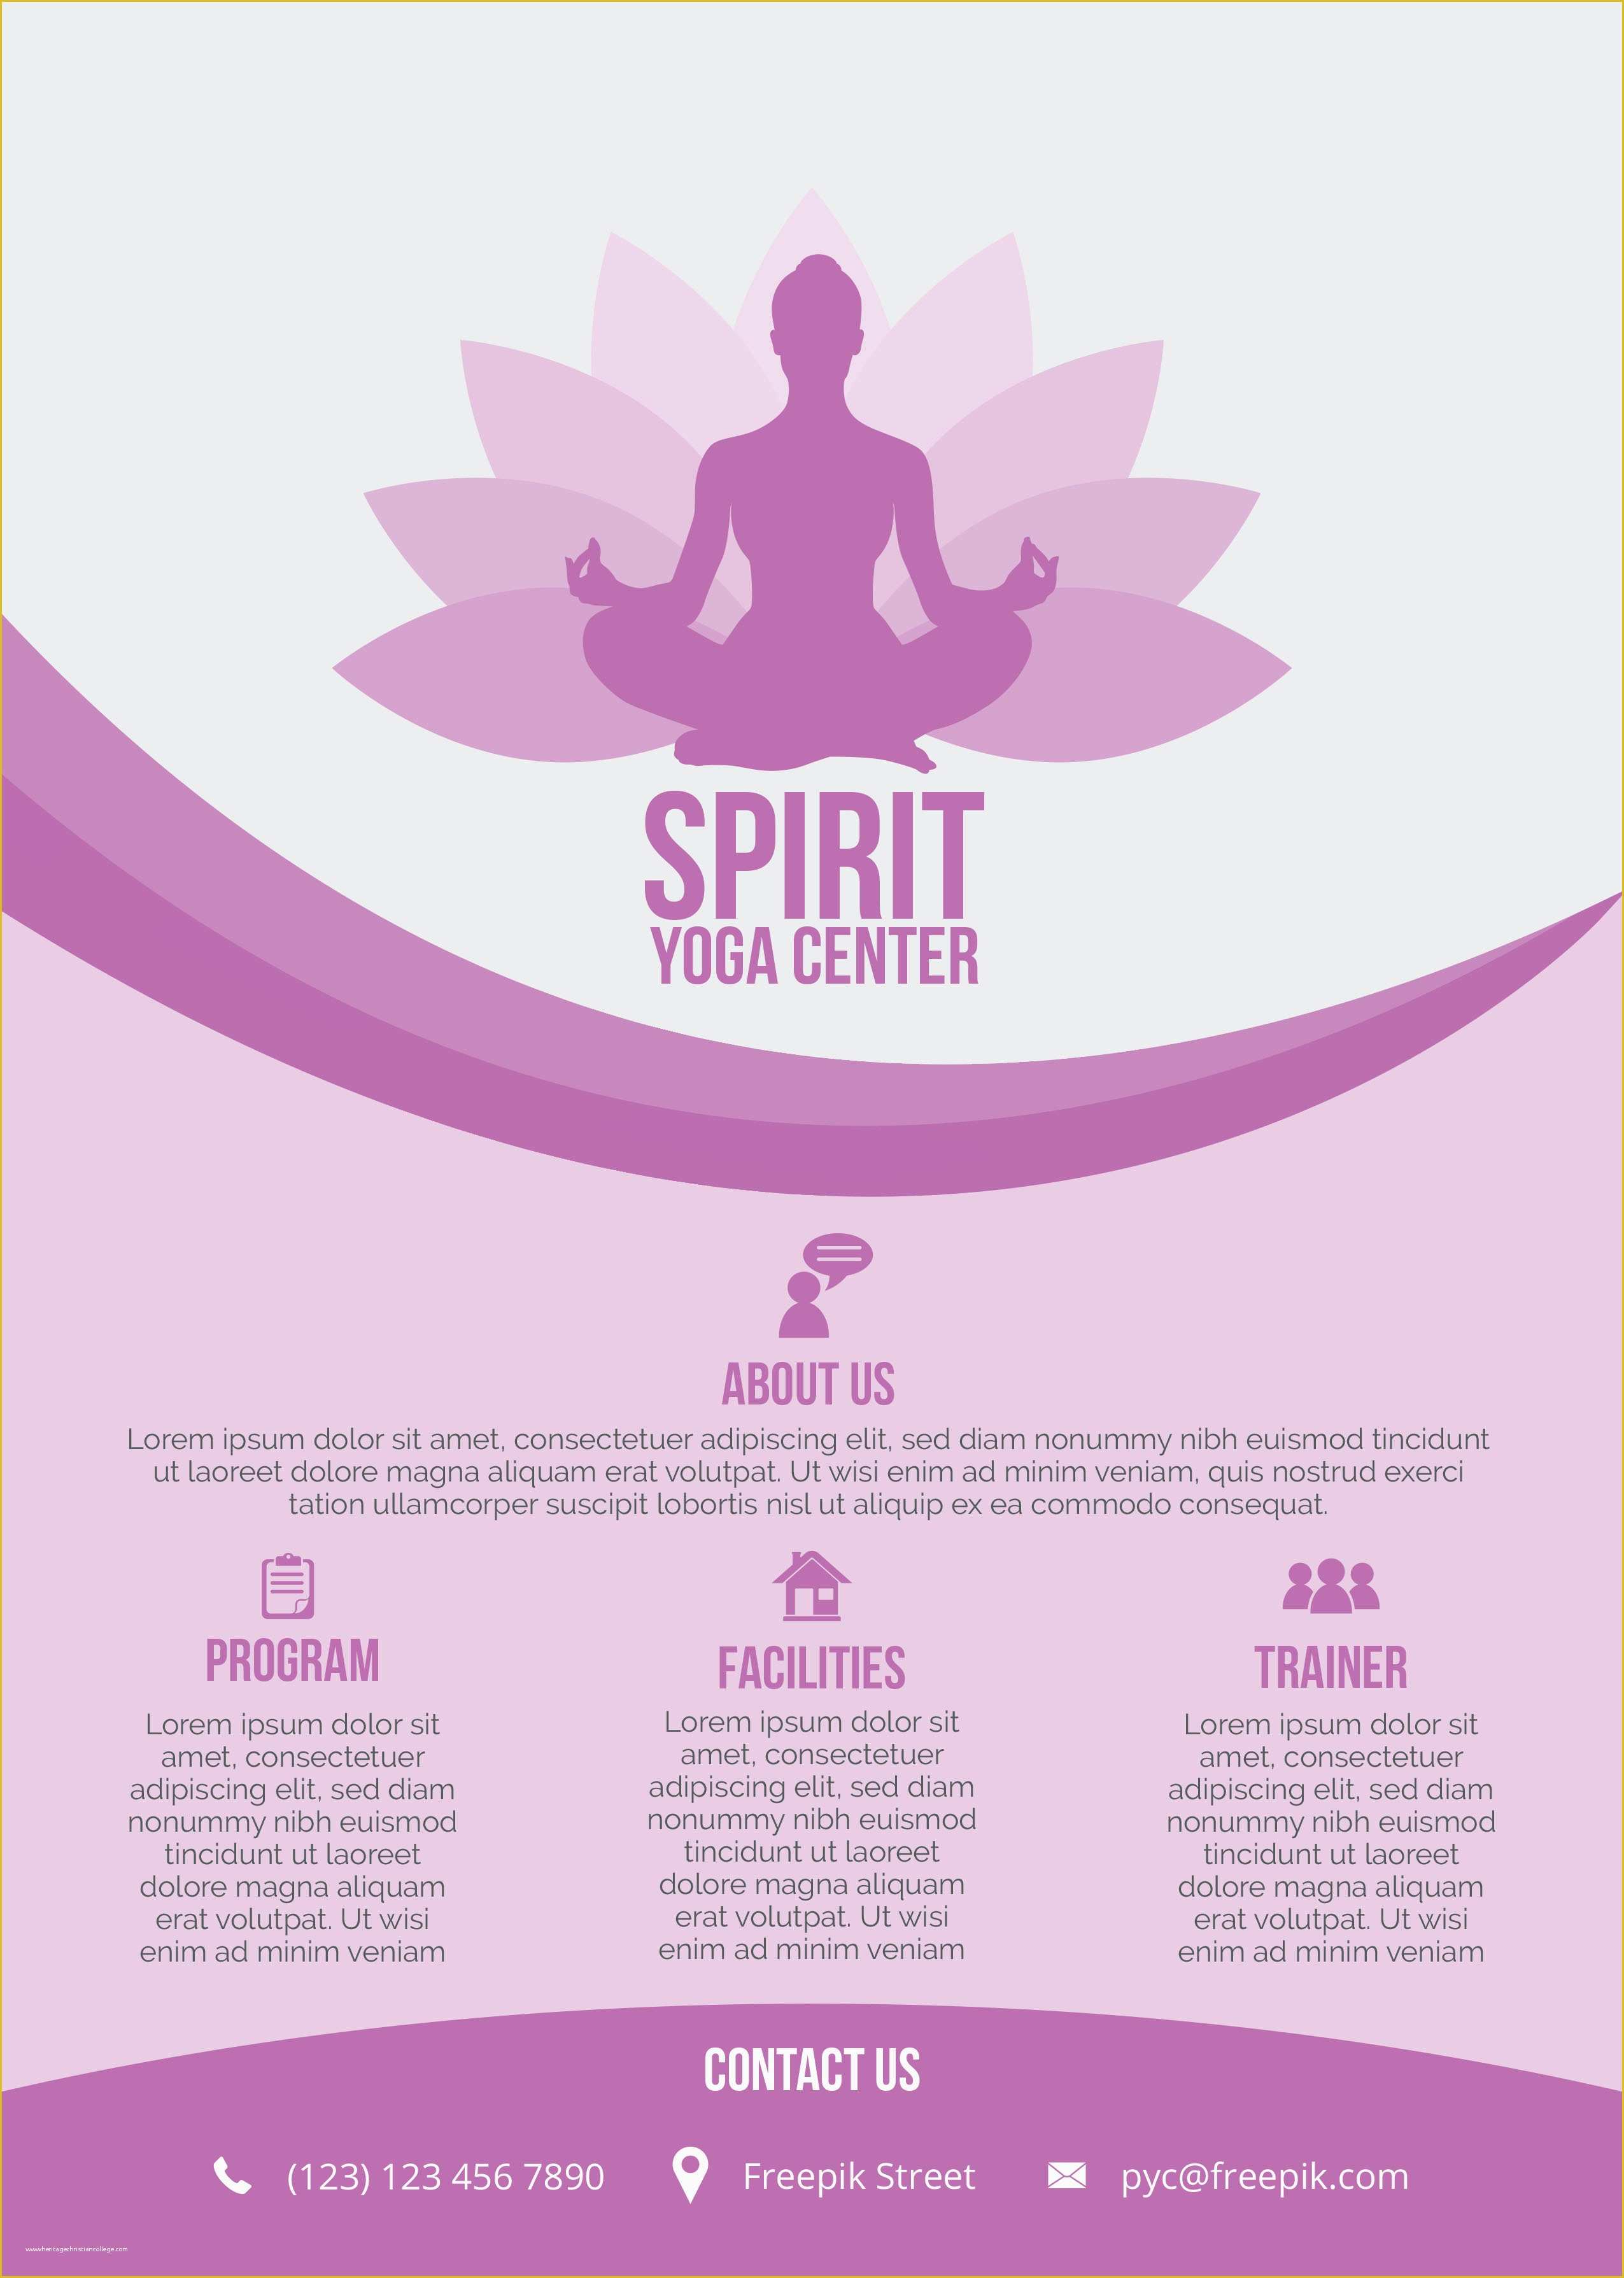 Free Flyer Design Templates Of 20 Distinctive Yoga Flyer Templates Free for Professionals